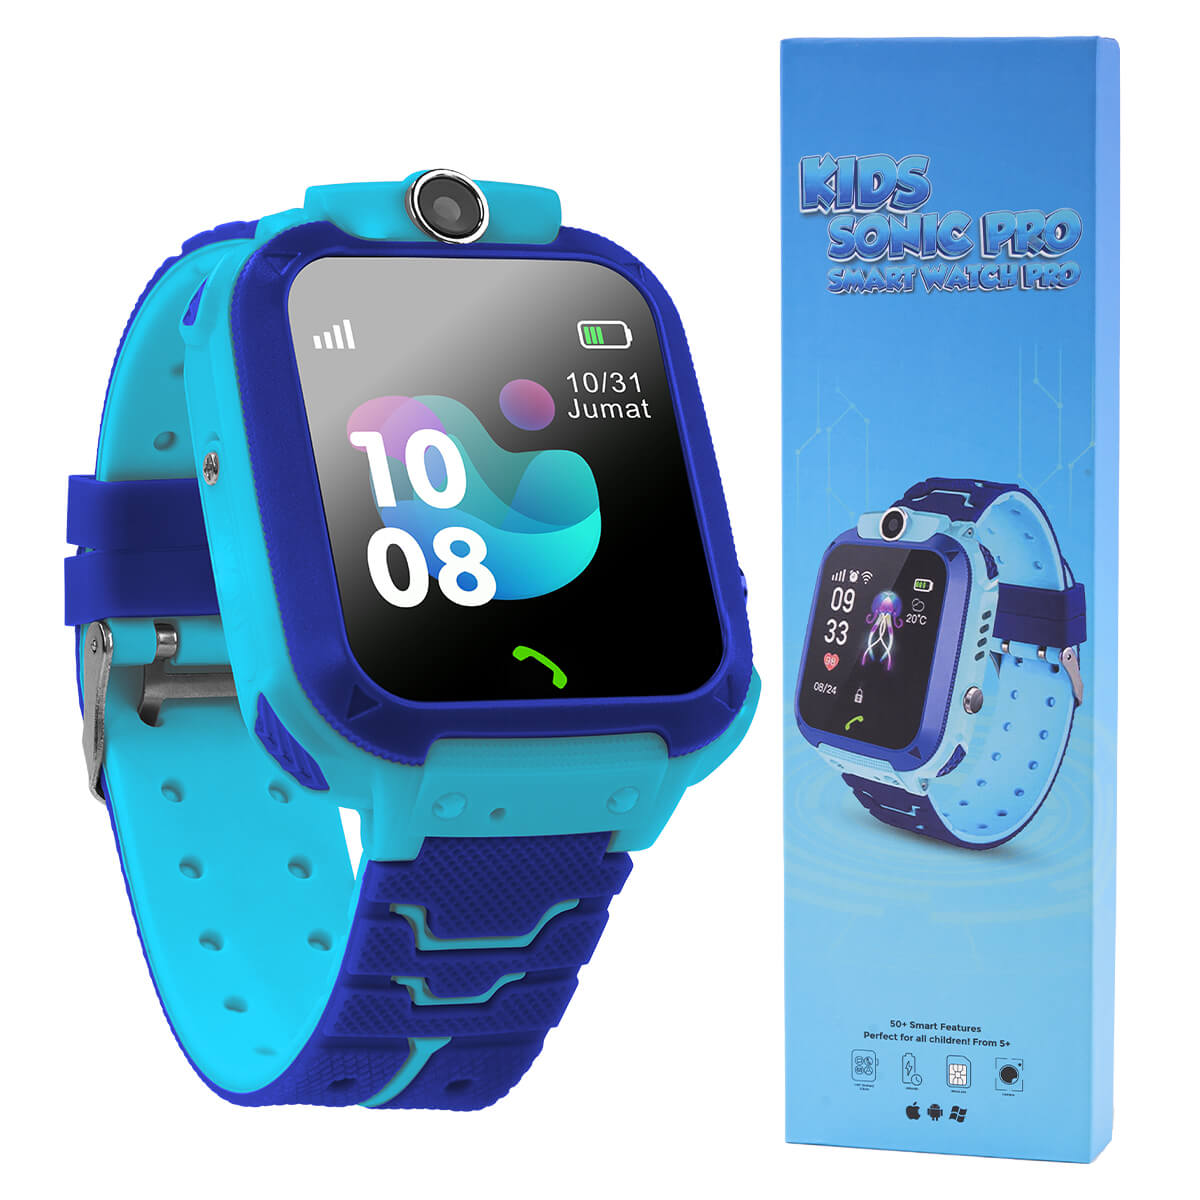 Kids Sonic Pro Smart Watch With GPS, LBS, SOS Button, Audio Calls &  Messages - *BEST SELLER*